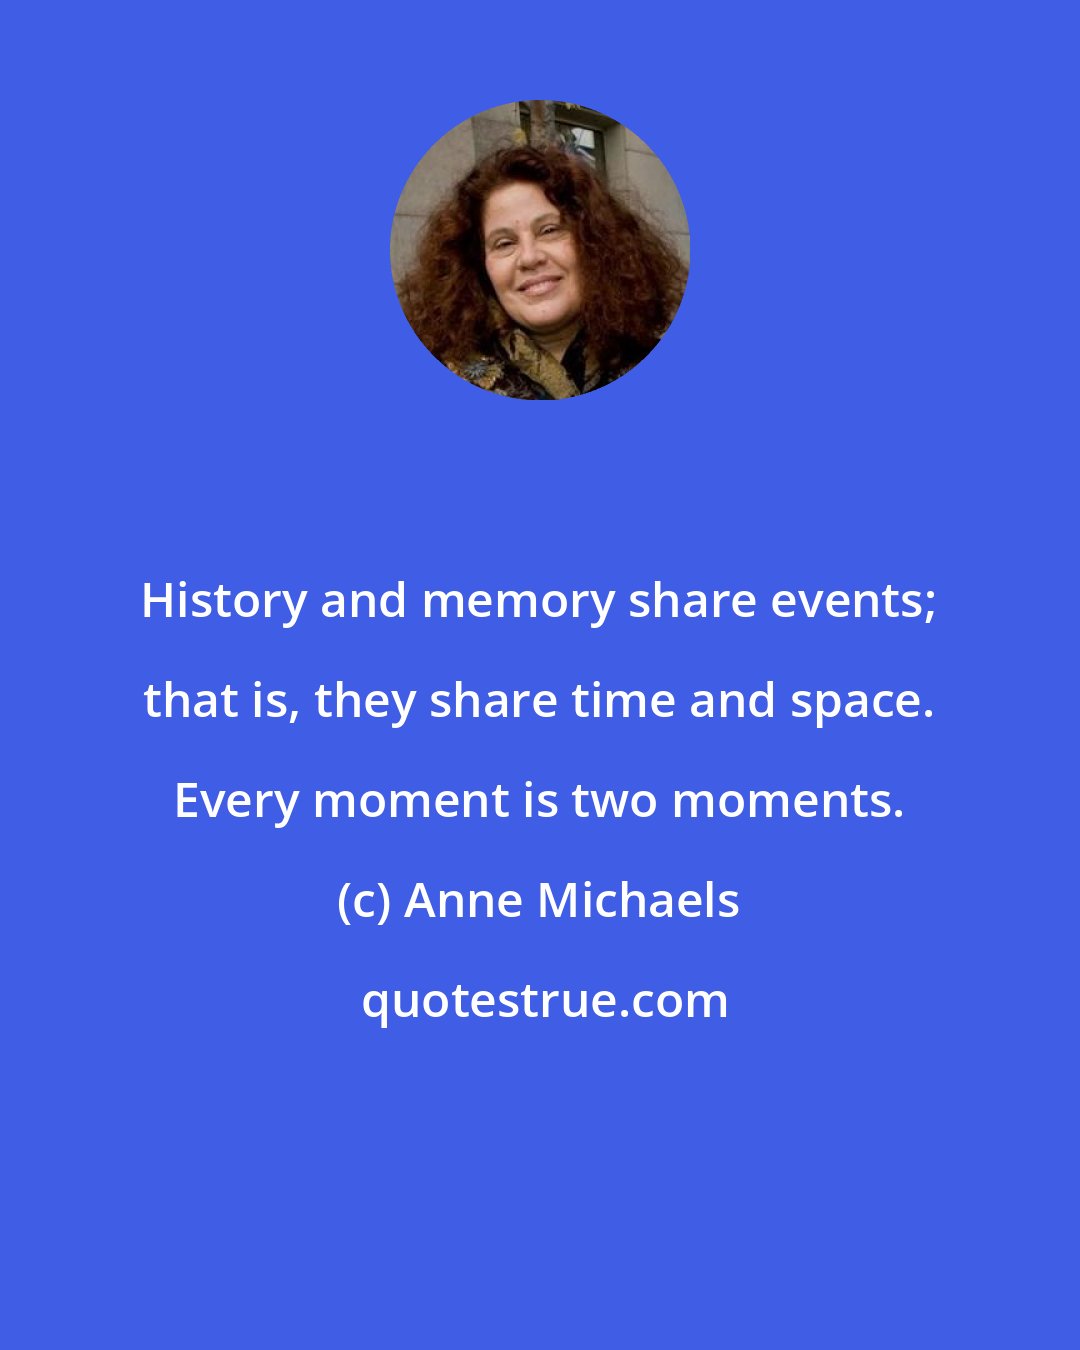 Anne Michaels: History and memory share events; that is, they share time and space. Every moment is two moments.